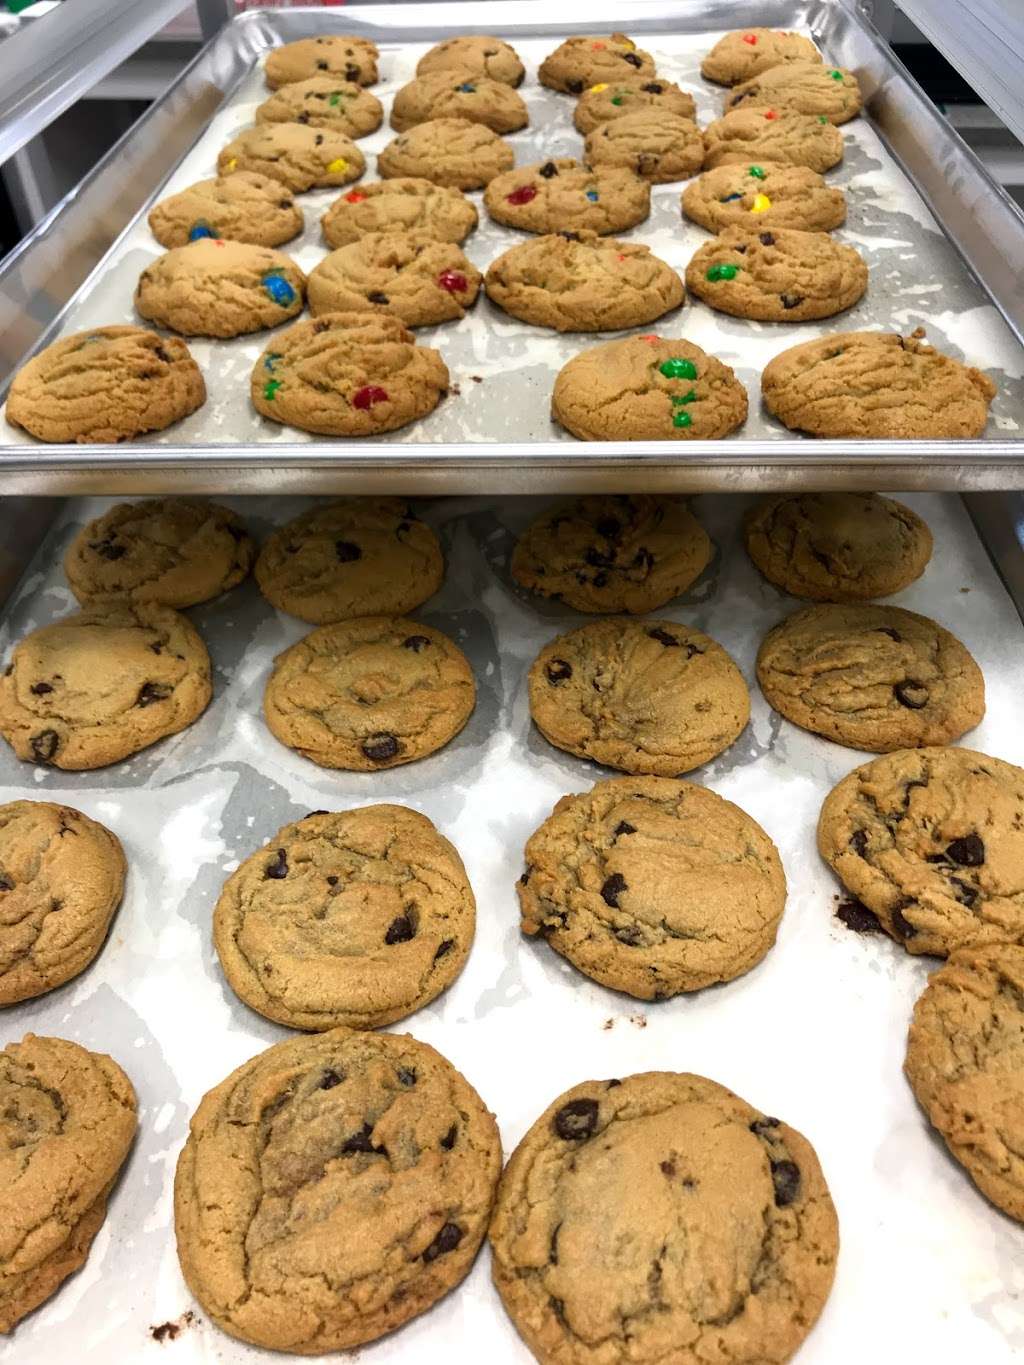 Country Cookie Lathrop | 7812 Hwy 116 &, I-35, Lathrop, MO 64465 | Phone: (816) 528-4415